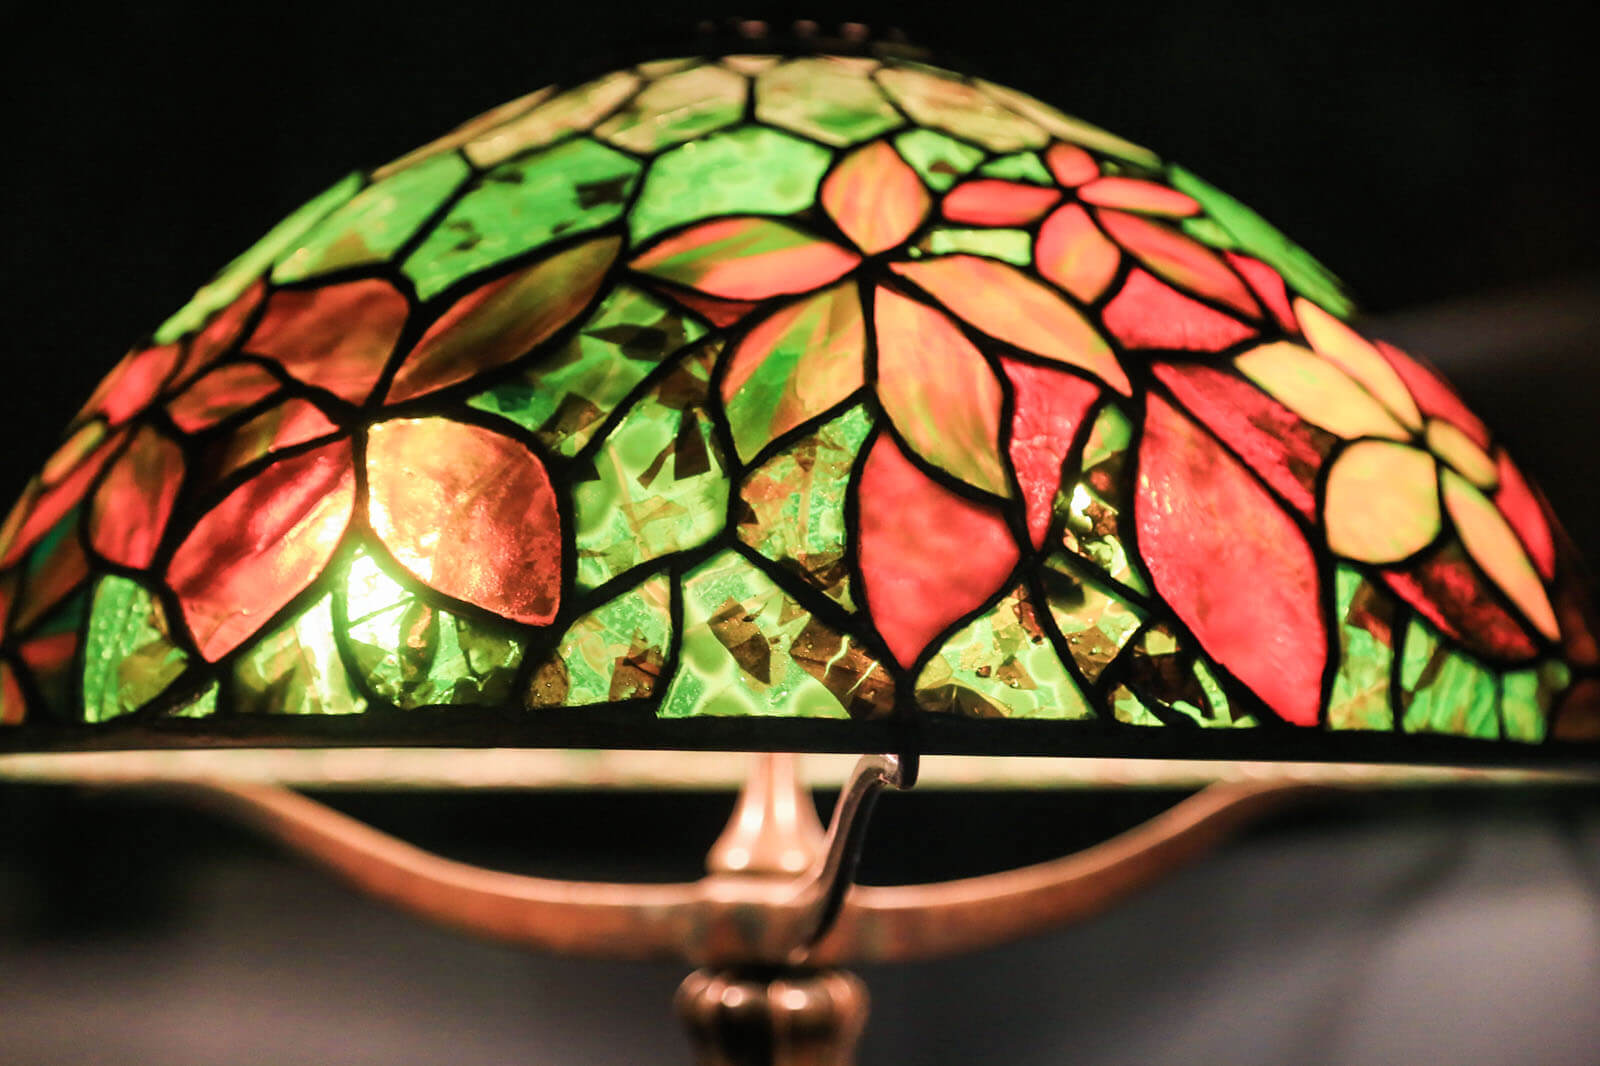 How To Repair Stained Glass Lamp Shade